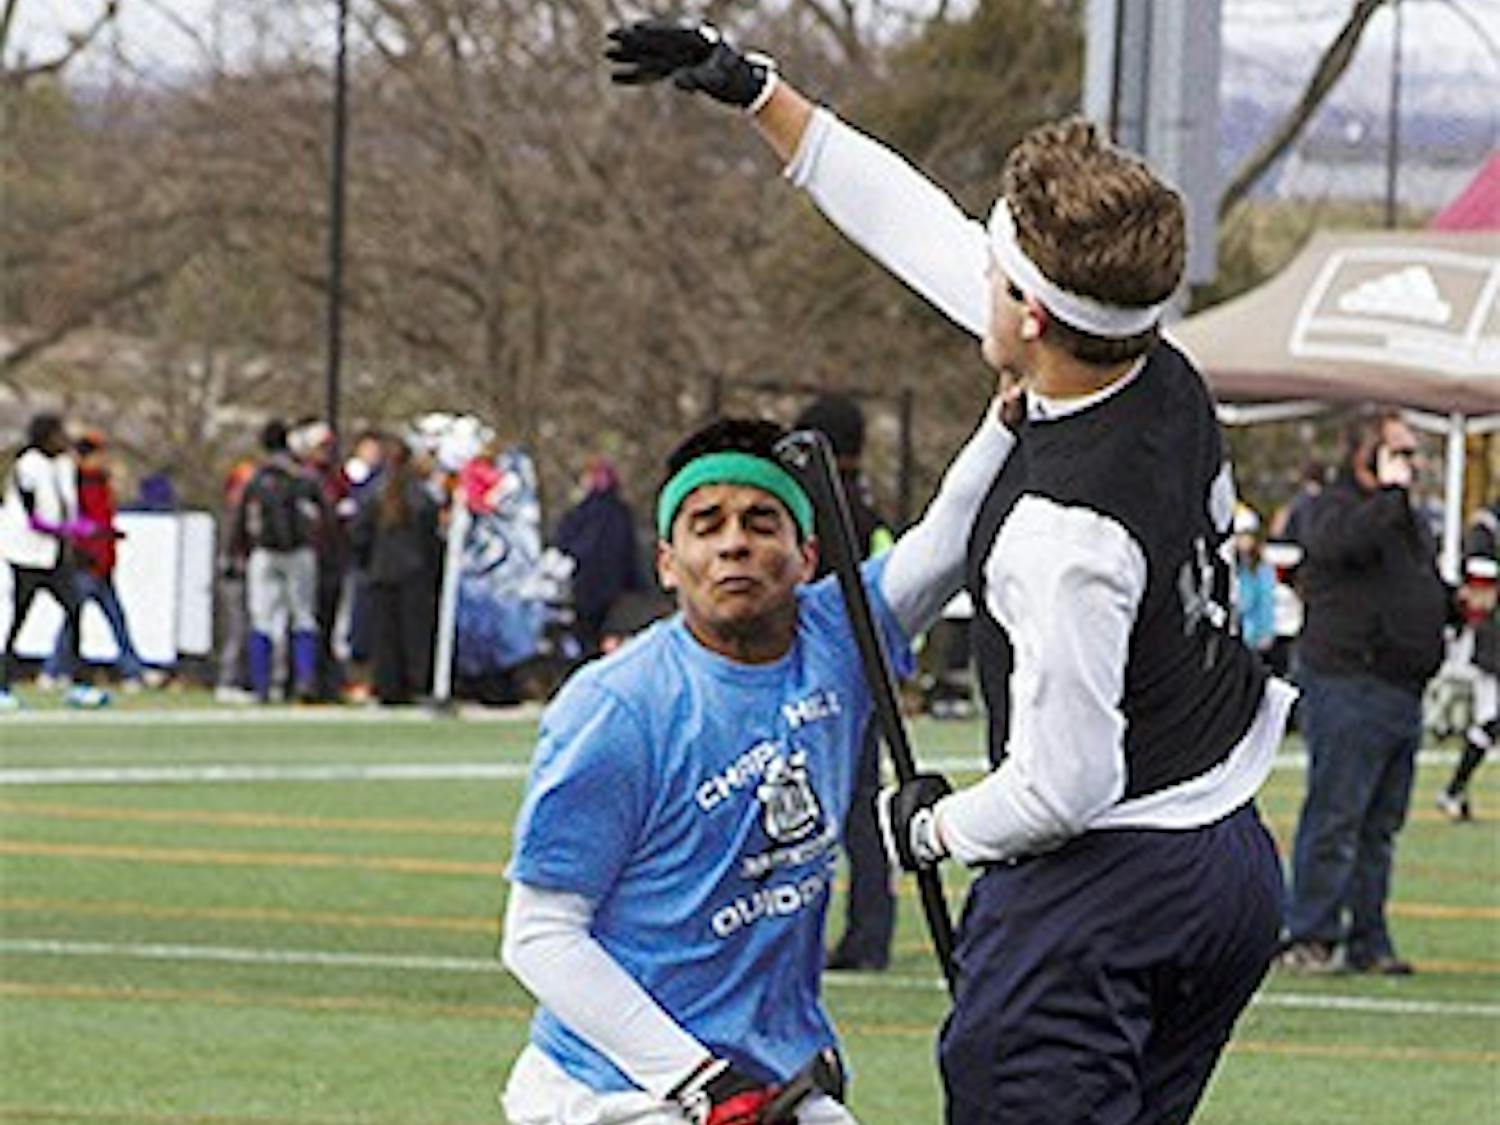 UNC Quidditch junior and co-captain Amit Katyayan plays in the Mid-Atlantic regionals tournament. Photo courtesy of Dani Palmer.